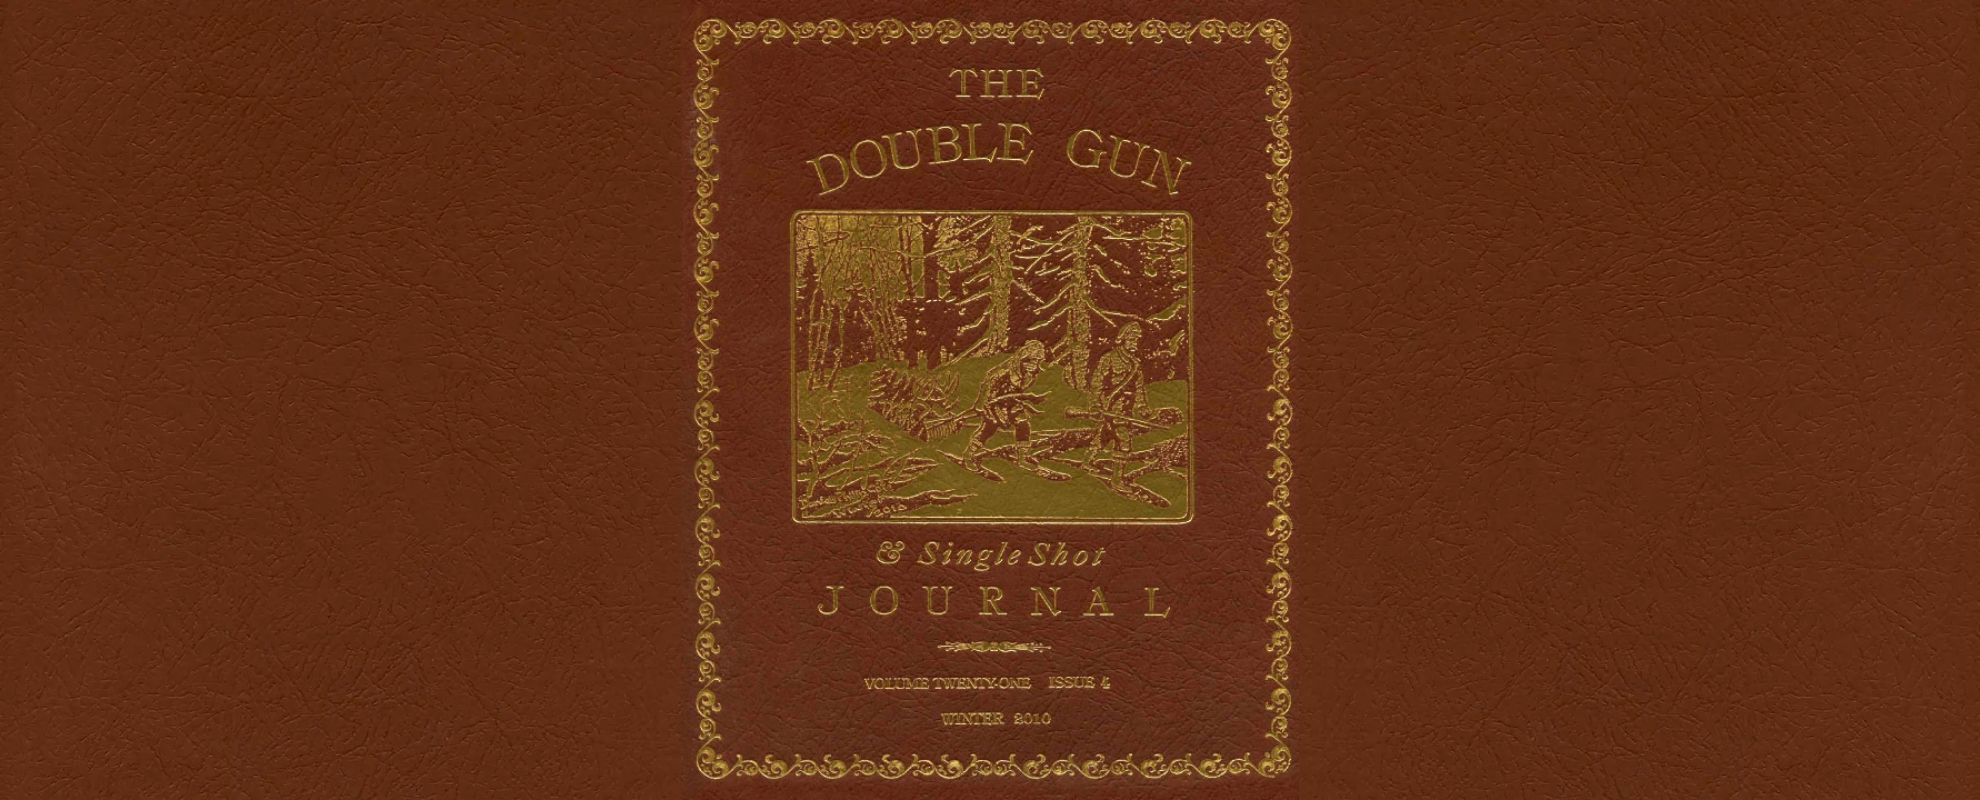 The Double Gun Journal Spring 2016 Edition Cover